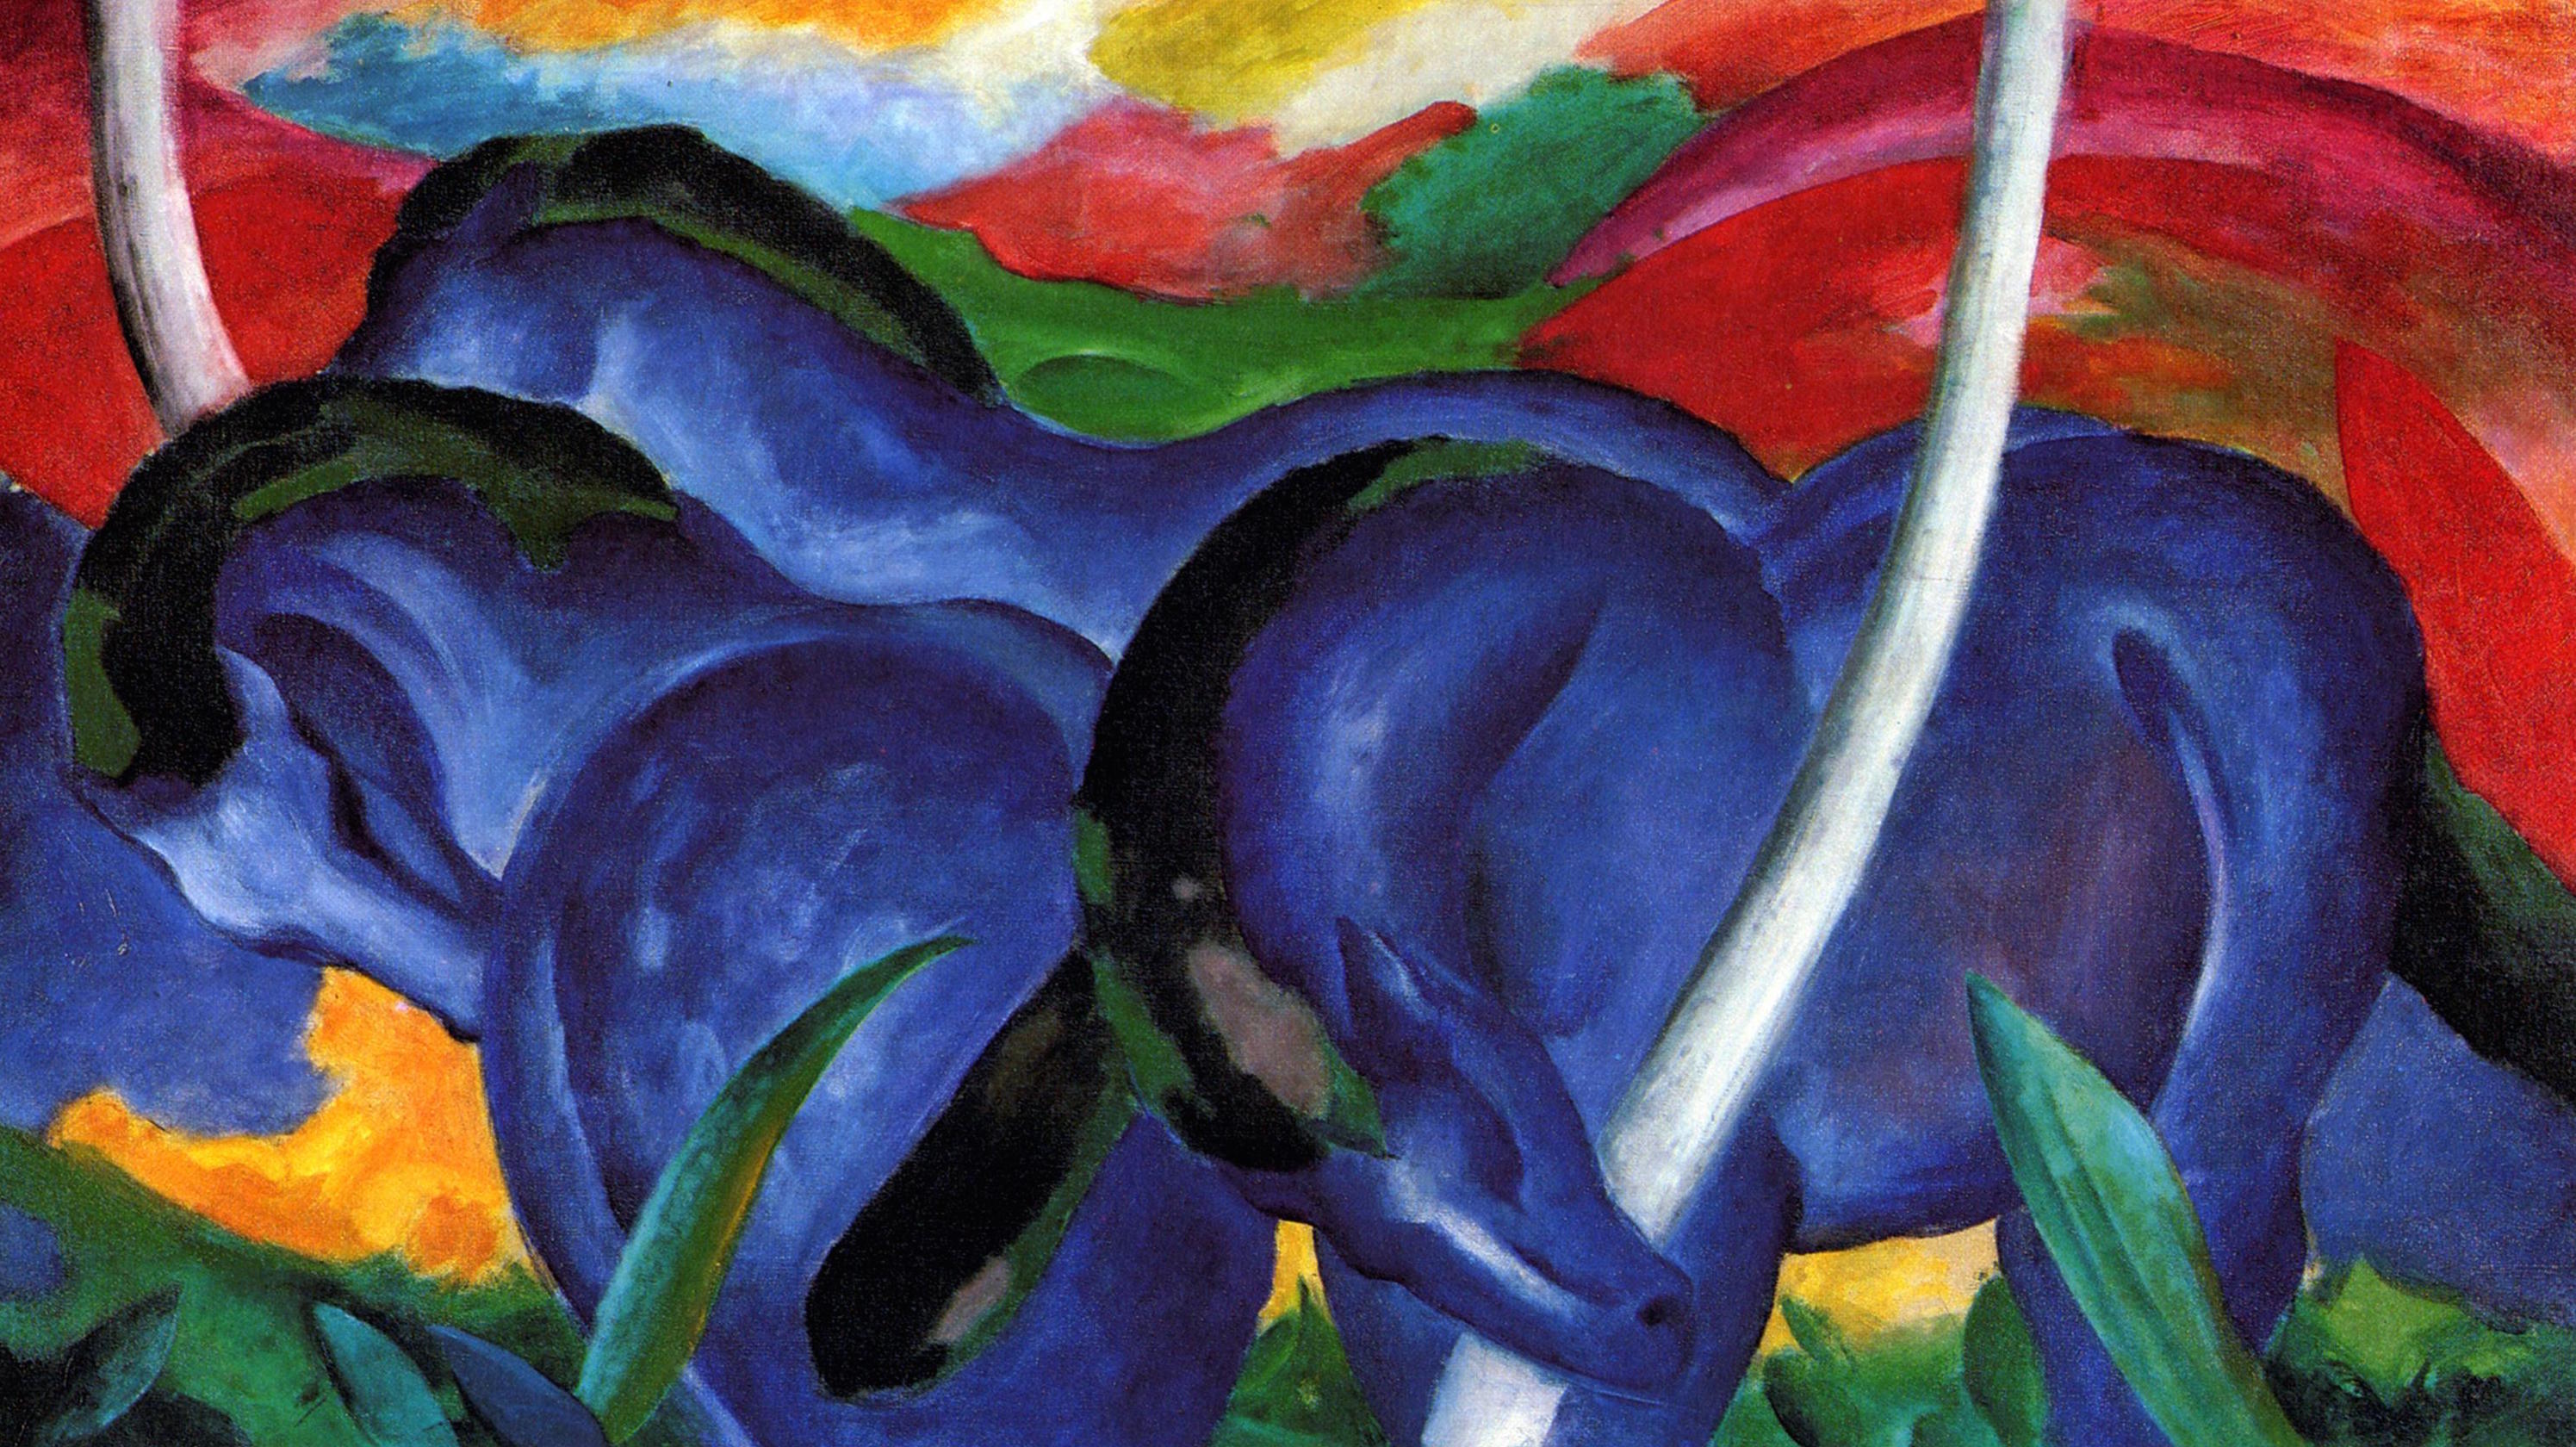 Large Blue Horses by Franz Marc - 1911 - 41.625 x 71.3125 inches Walker Art Center